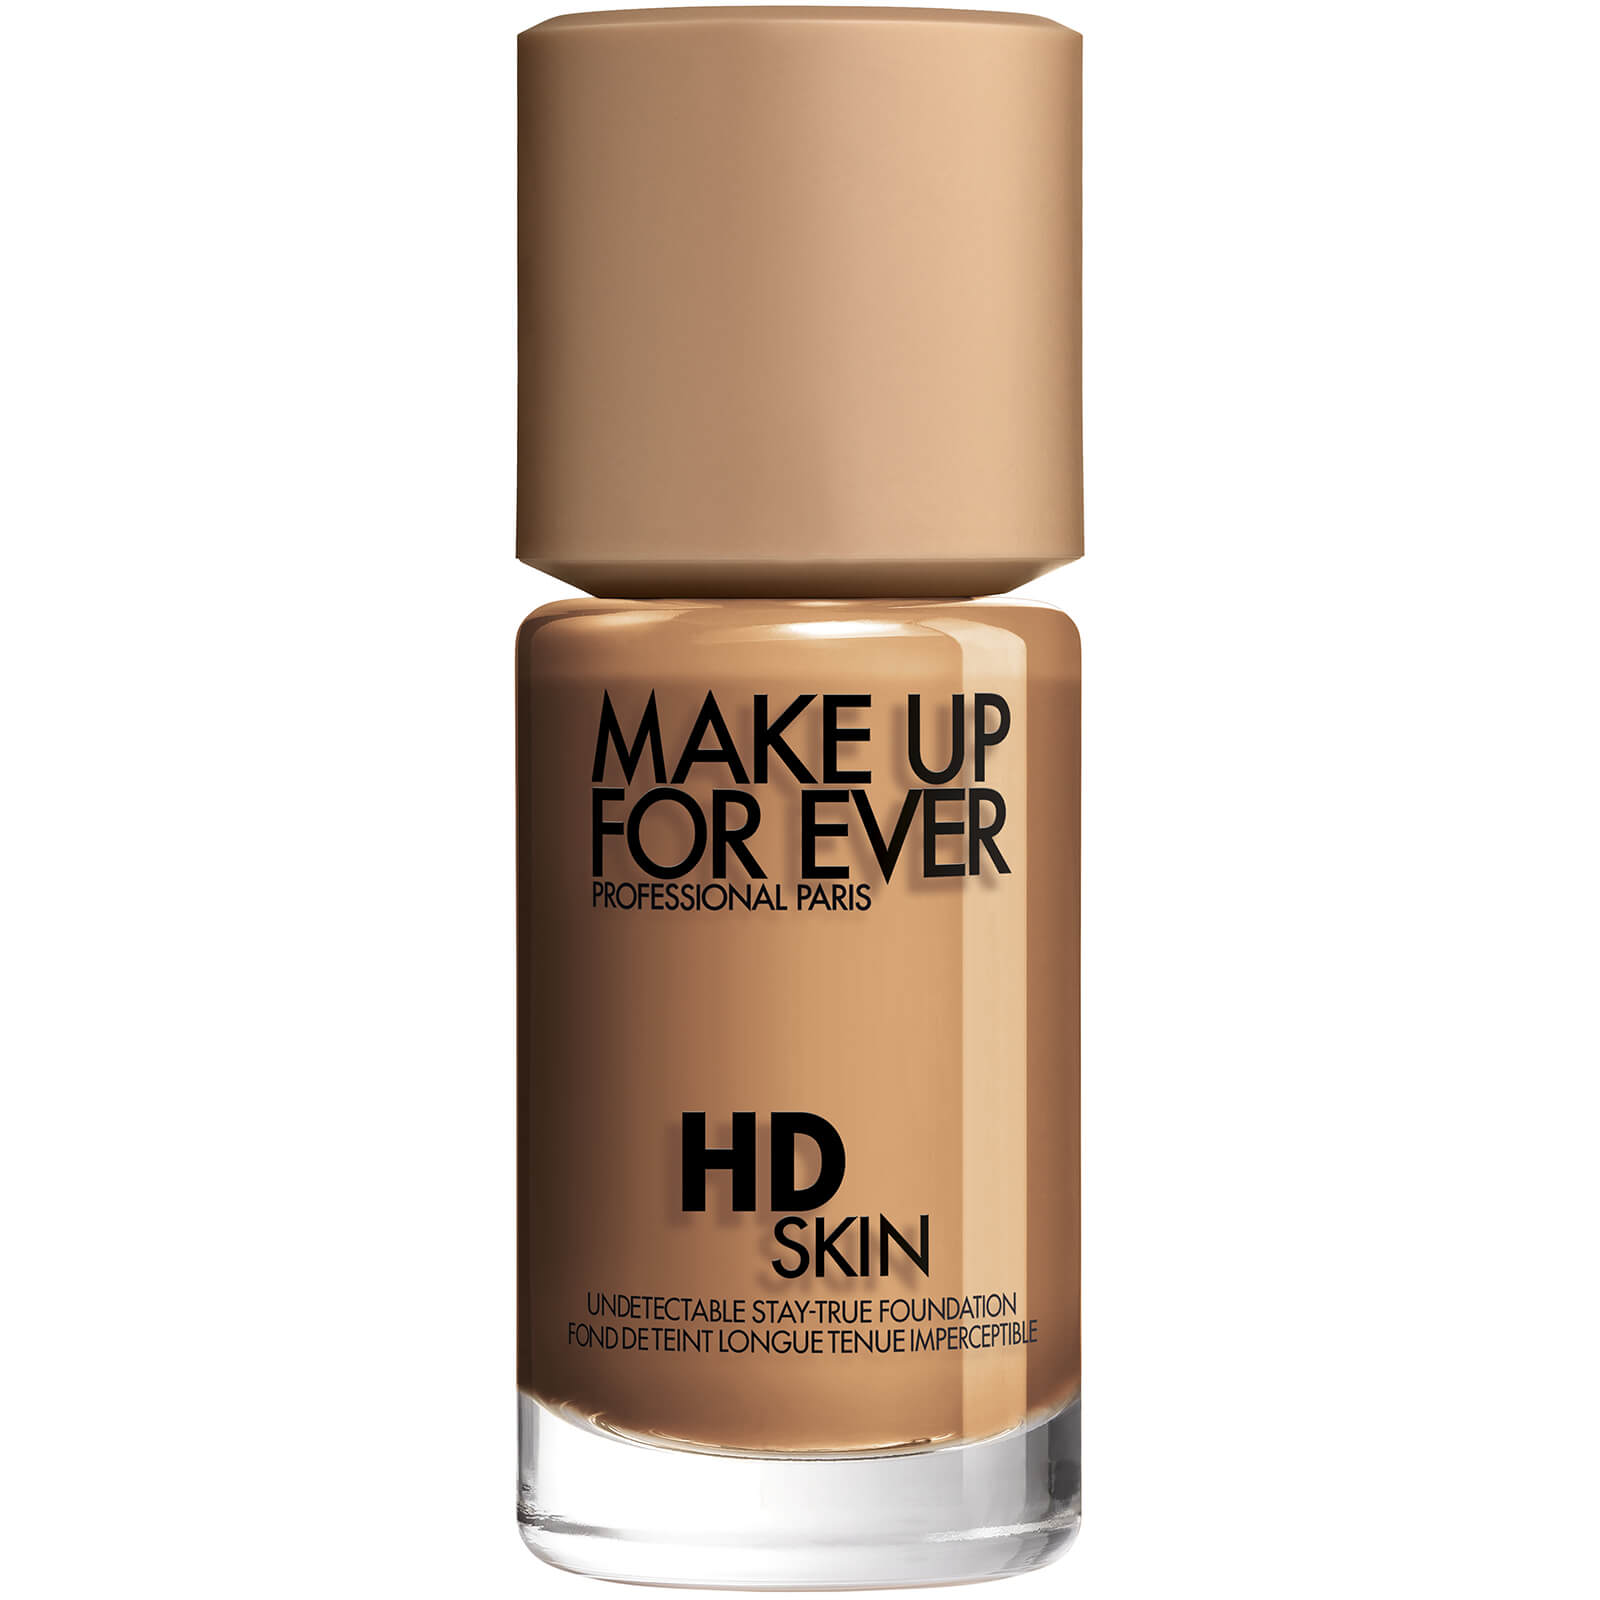 Make Up For Ever HD Skin Foundation 30ml (Various Shades) - 3Y52 Warm Chestnut